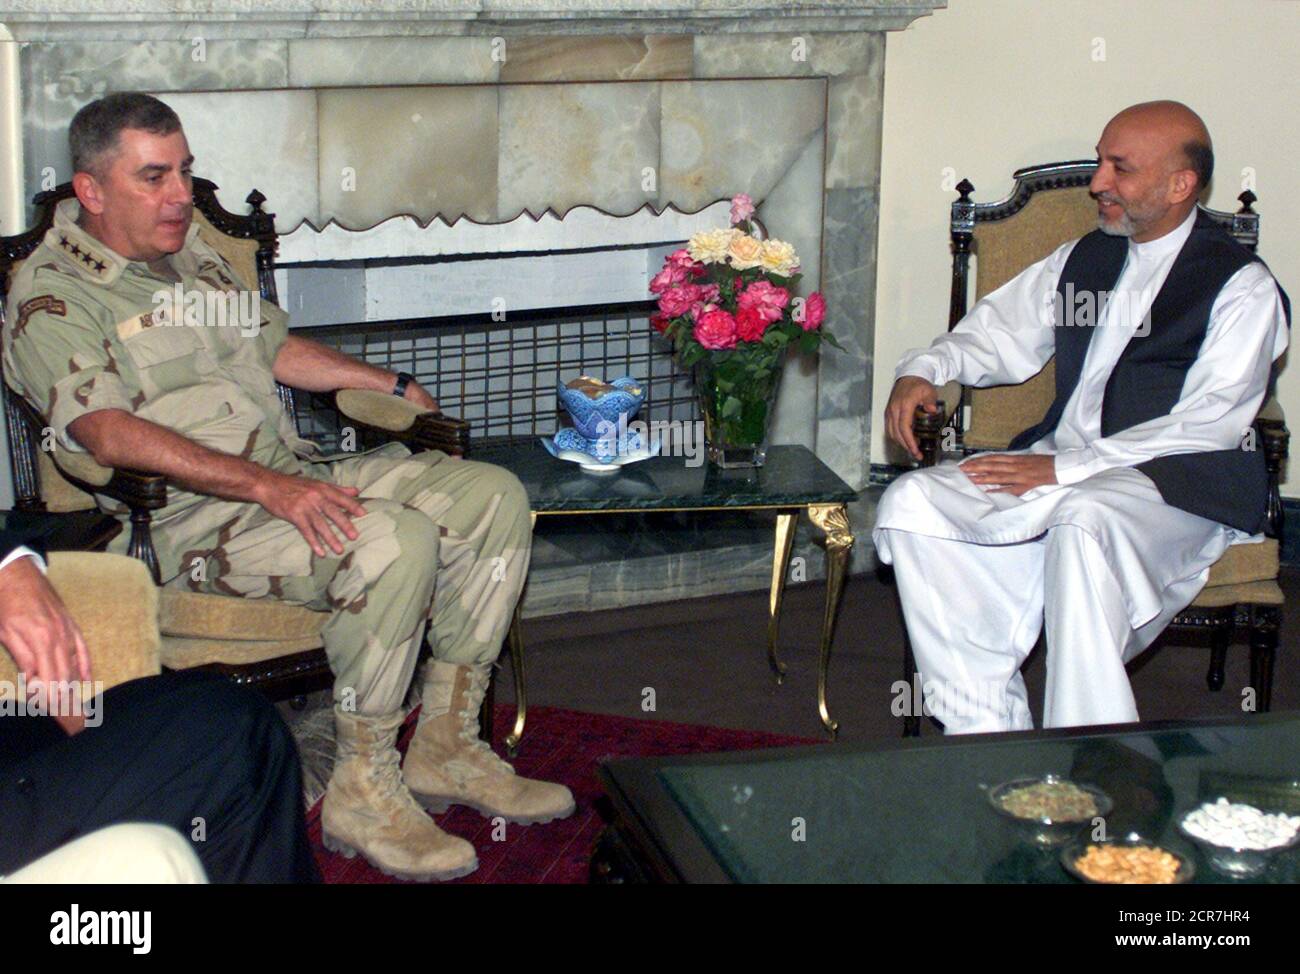 General John Abizaid (L), Commander, U.S. Central Command, meets Afghan President Hamid Karzai in Kabul on July 24, 2003. The United States said on Thursday it had sent B-52 and Harrier strike aircraft to bomb guerrillas who rocketed a base in eastern Afghanistan, while U.S. airborne and Italian mountain troops and more than 1,000 Afghan soldiers took part in major operation seeking to engage militants in the southeast. REUTERS/Ahmad Masood  AM/RCS Stock Photo